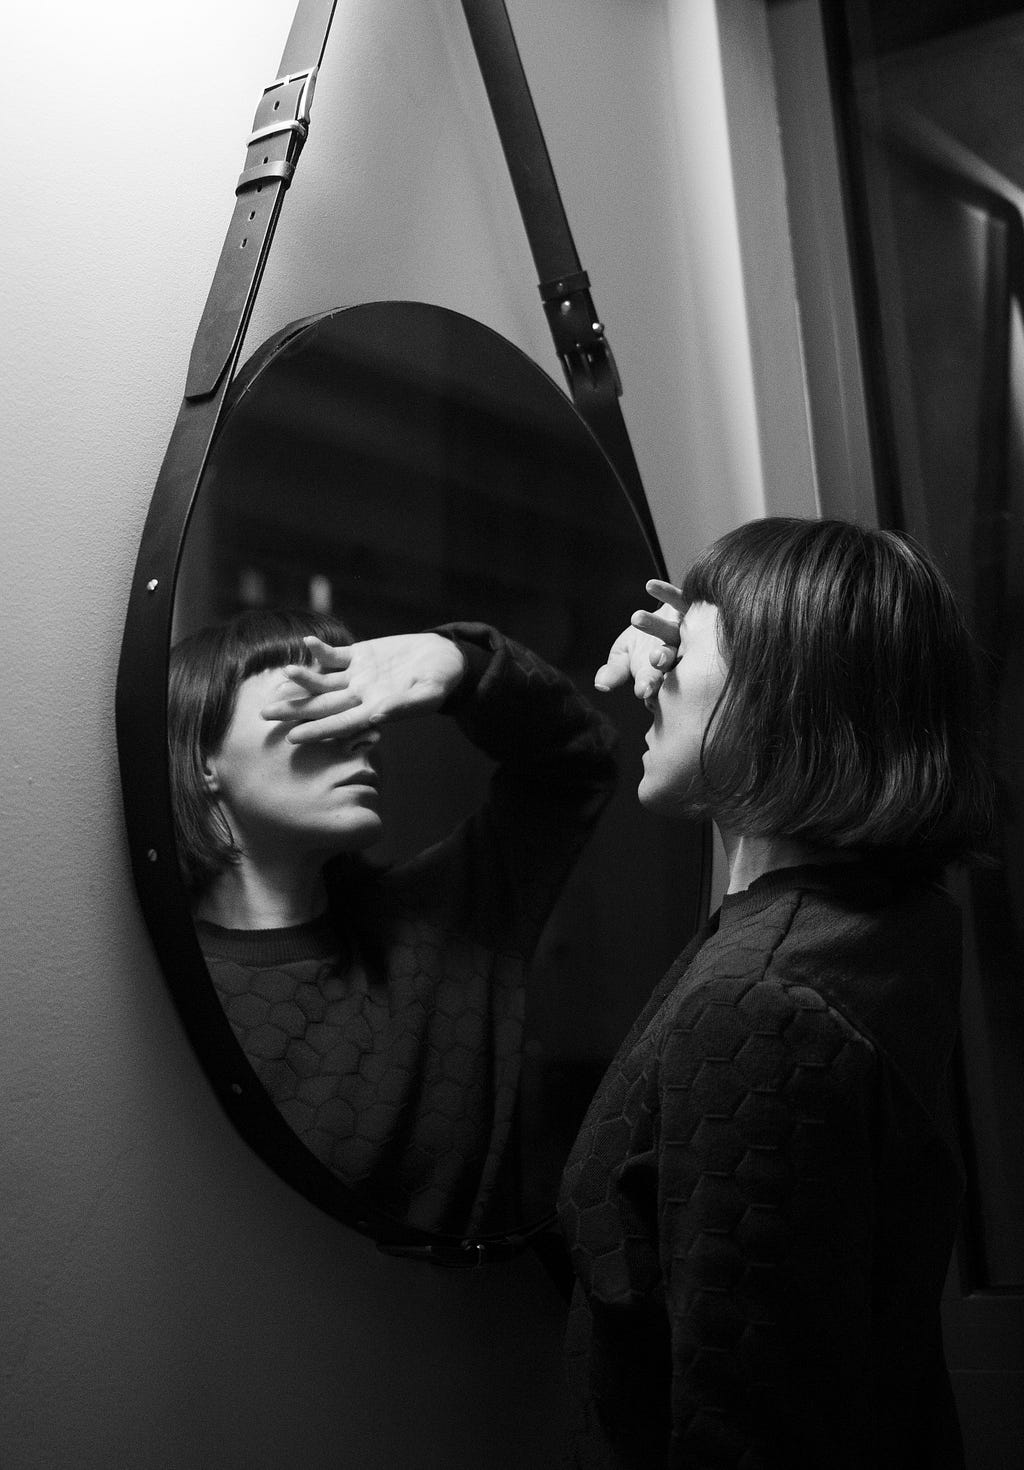 A woman covers her eyes to keep from seeing her reflection in a mirror